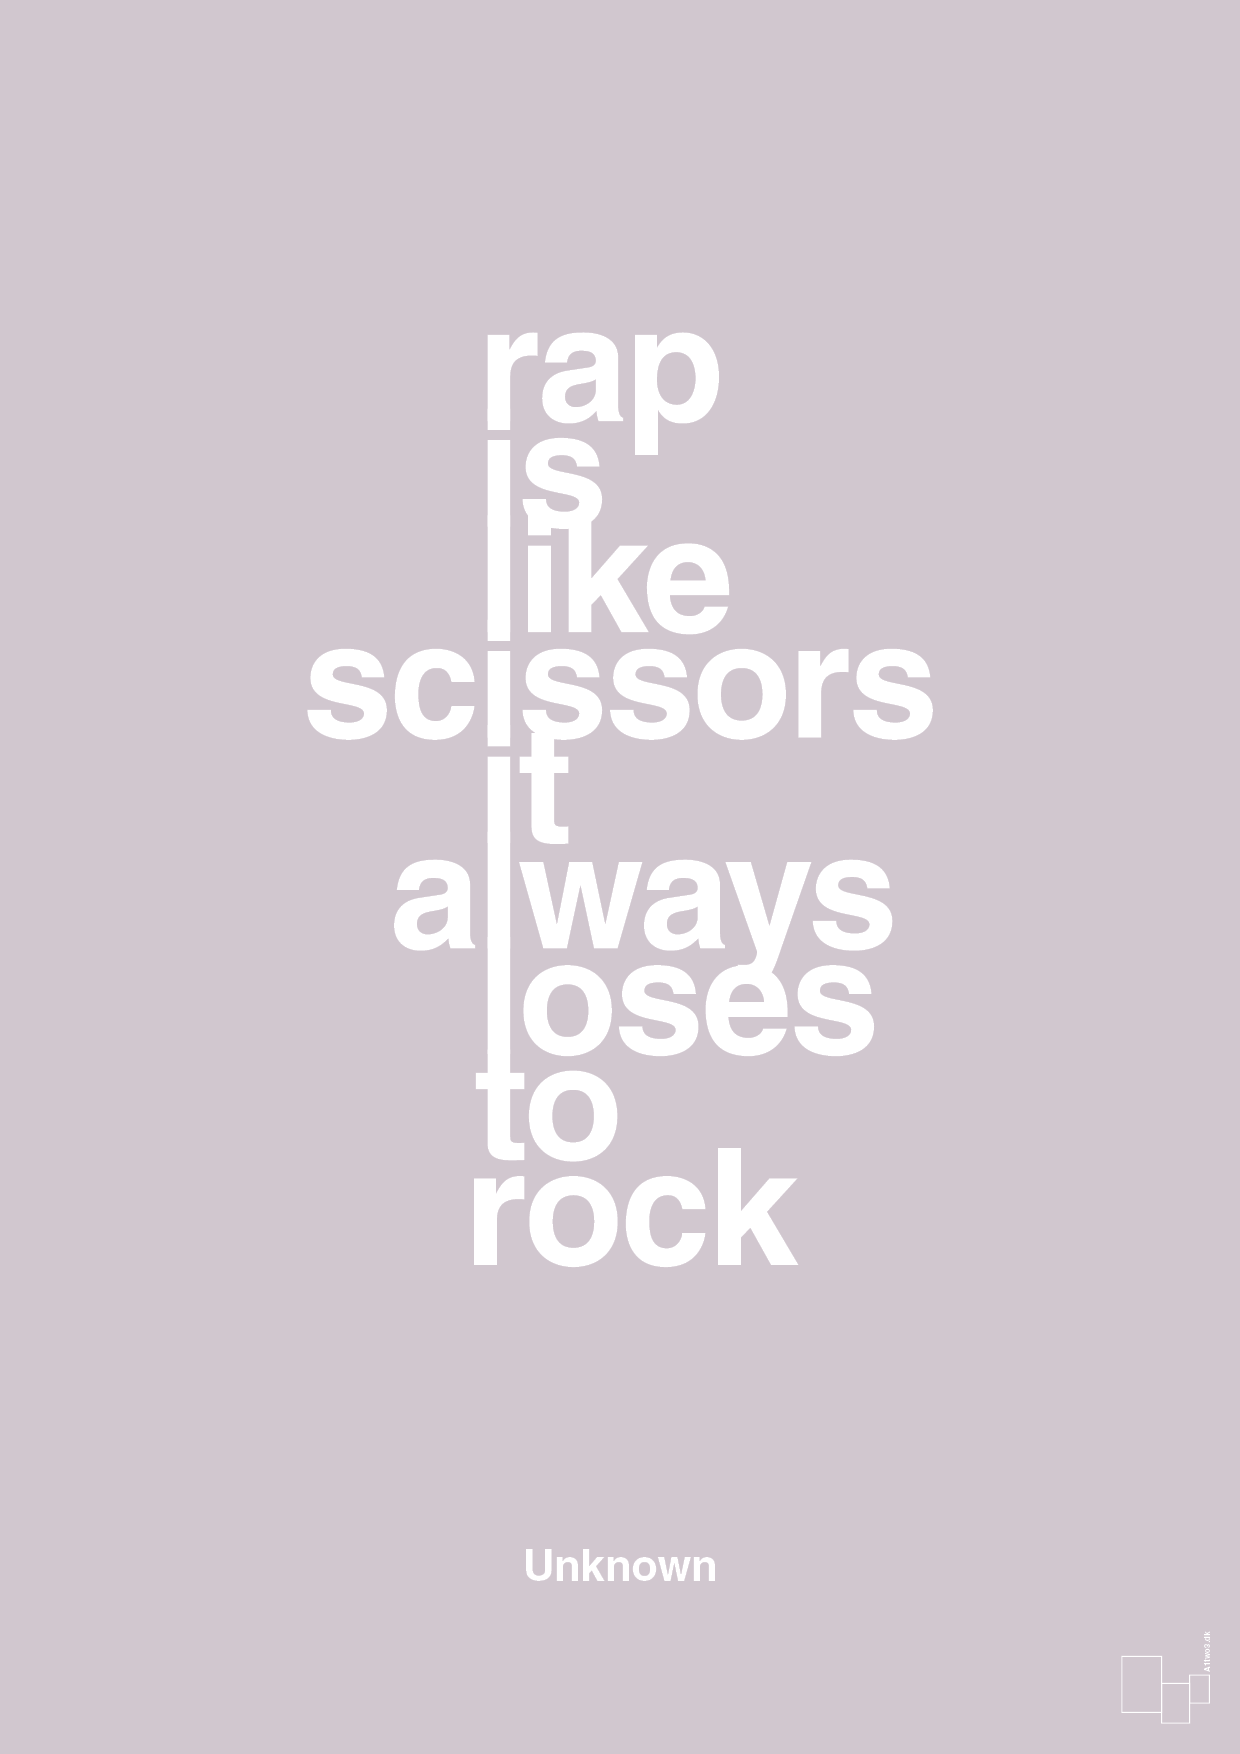 rap is like scissors it always loses to rock - Plakat med Citater i Dusty Lilac